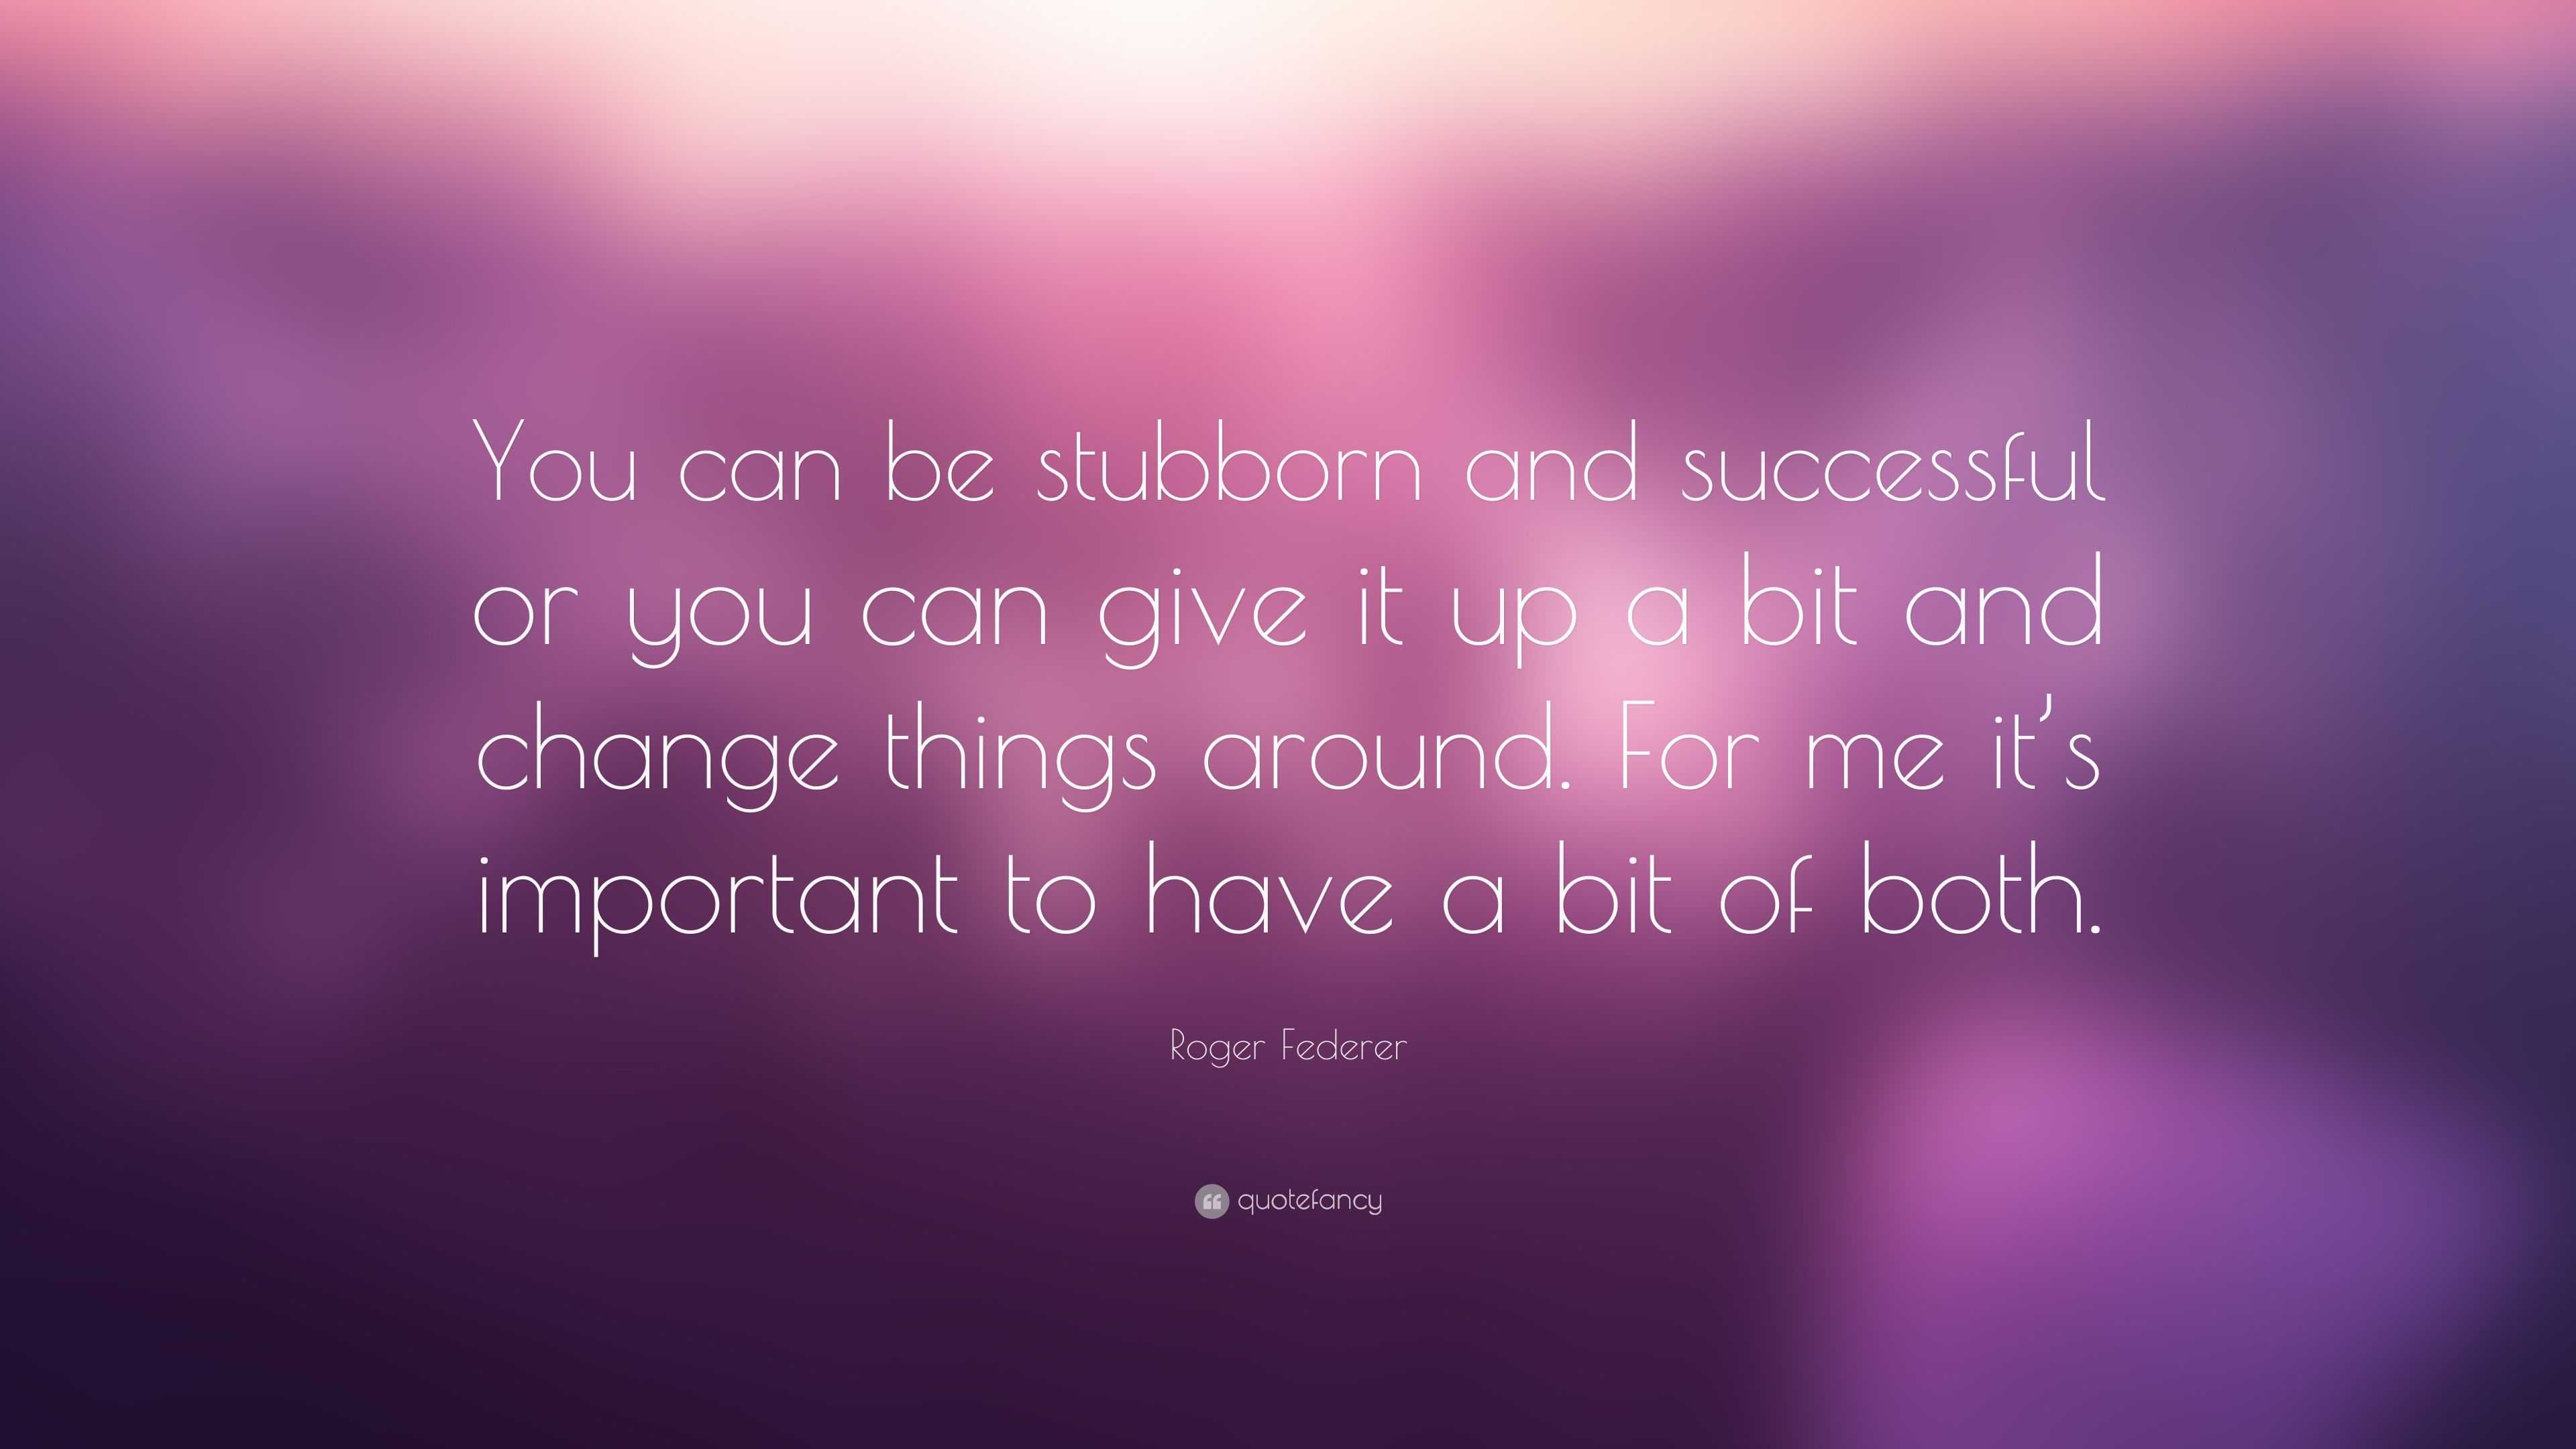 Roger Federer Quote: "You can be stubborn and successful ...